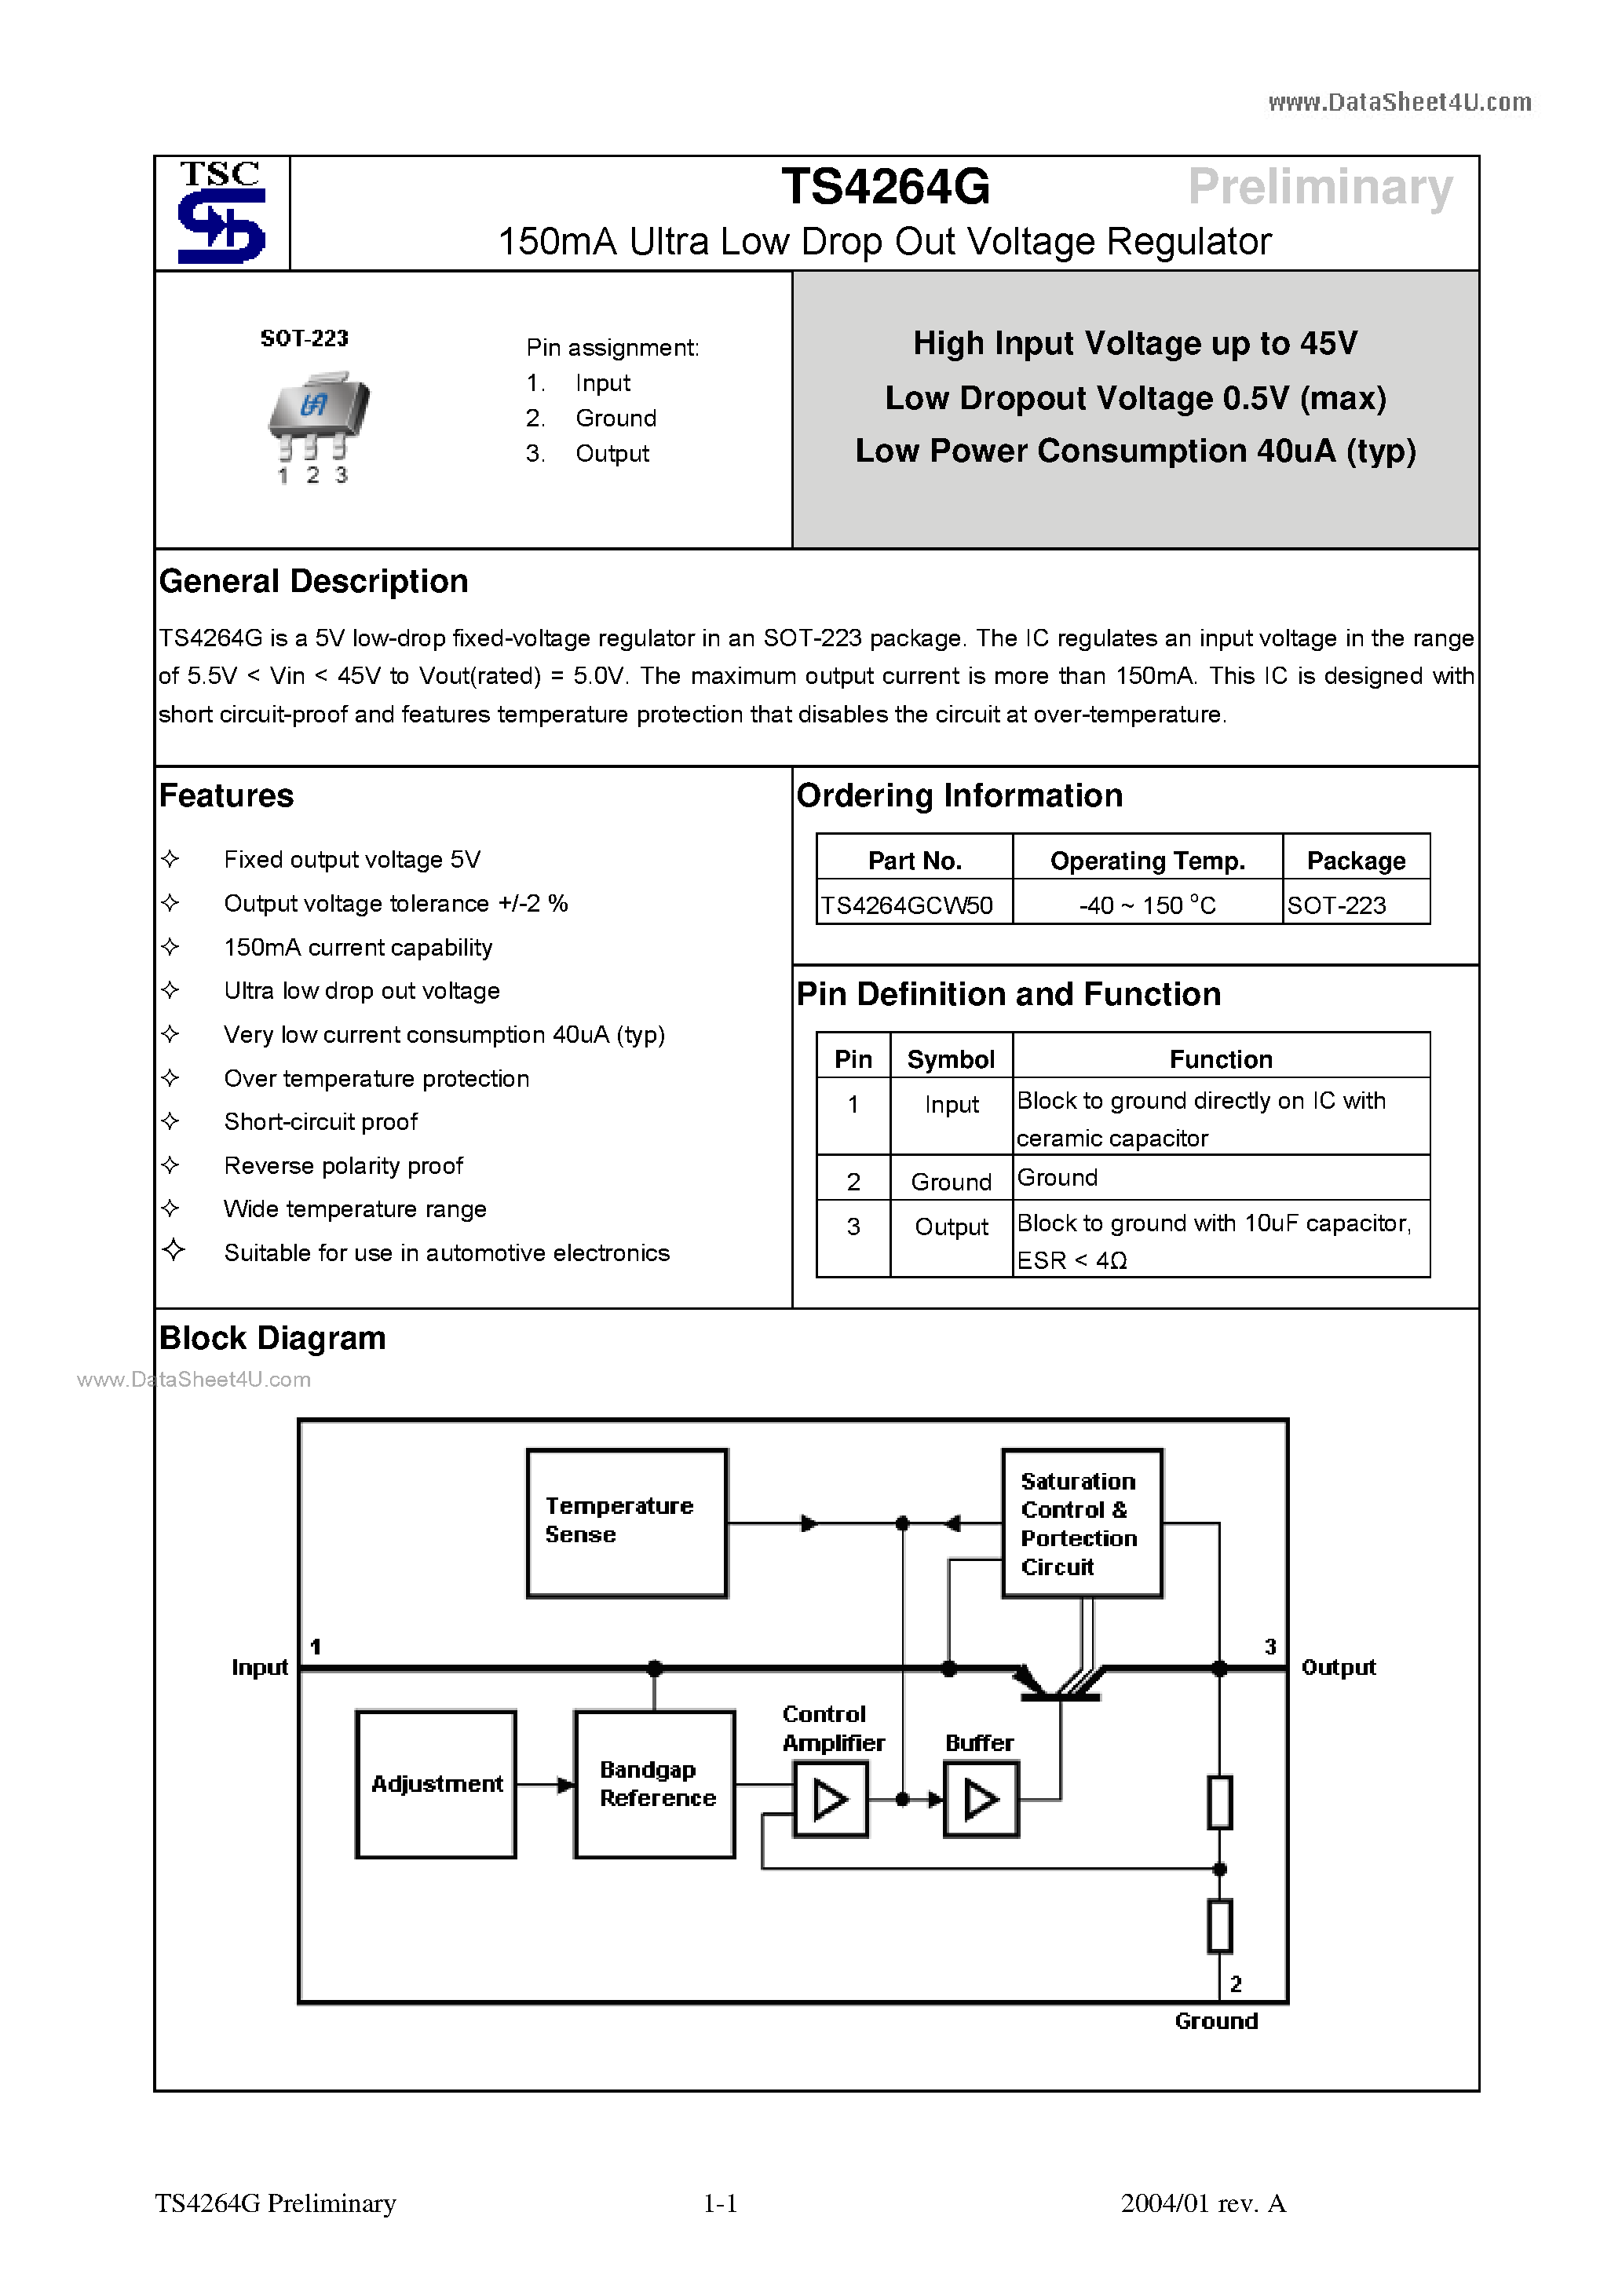 Datasheet TS4264G - 150mA Ultra Low Drop Out Voltage Regulator page 1